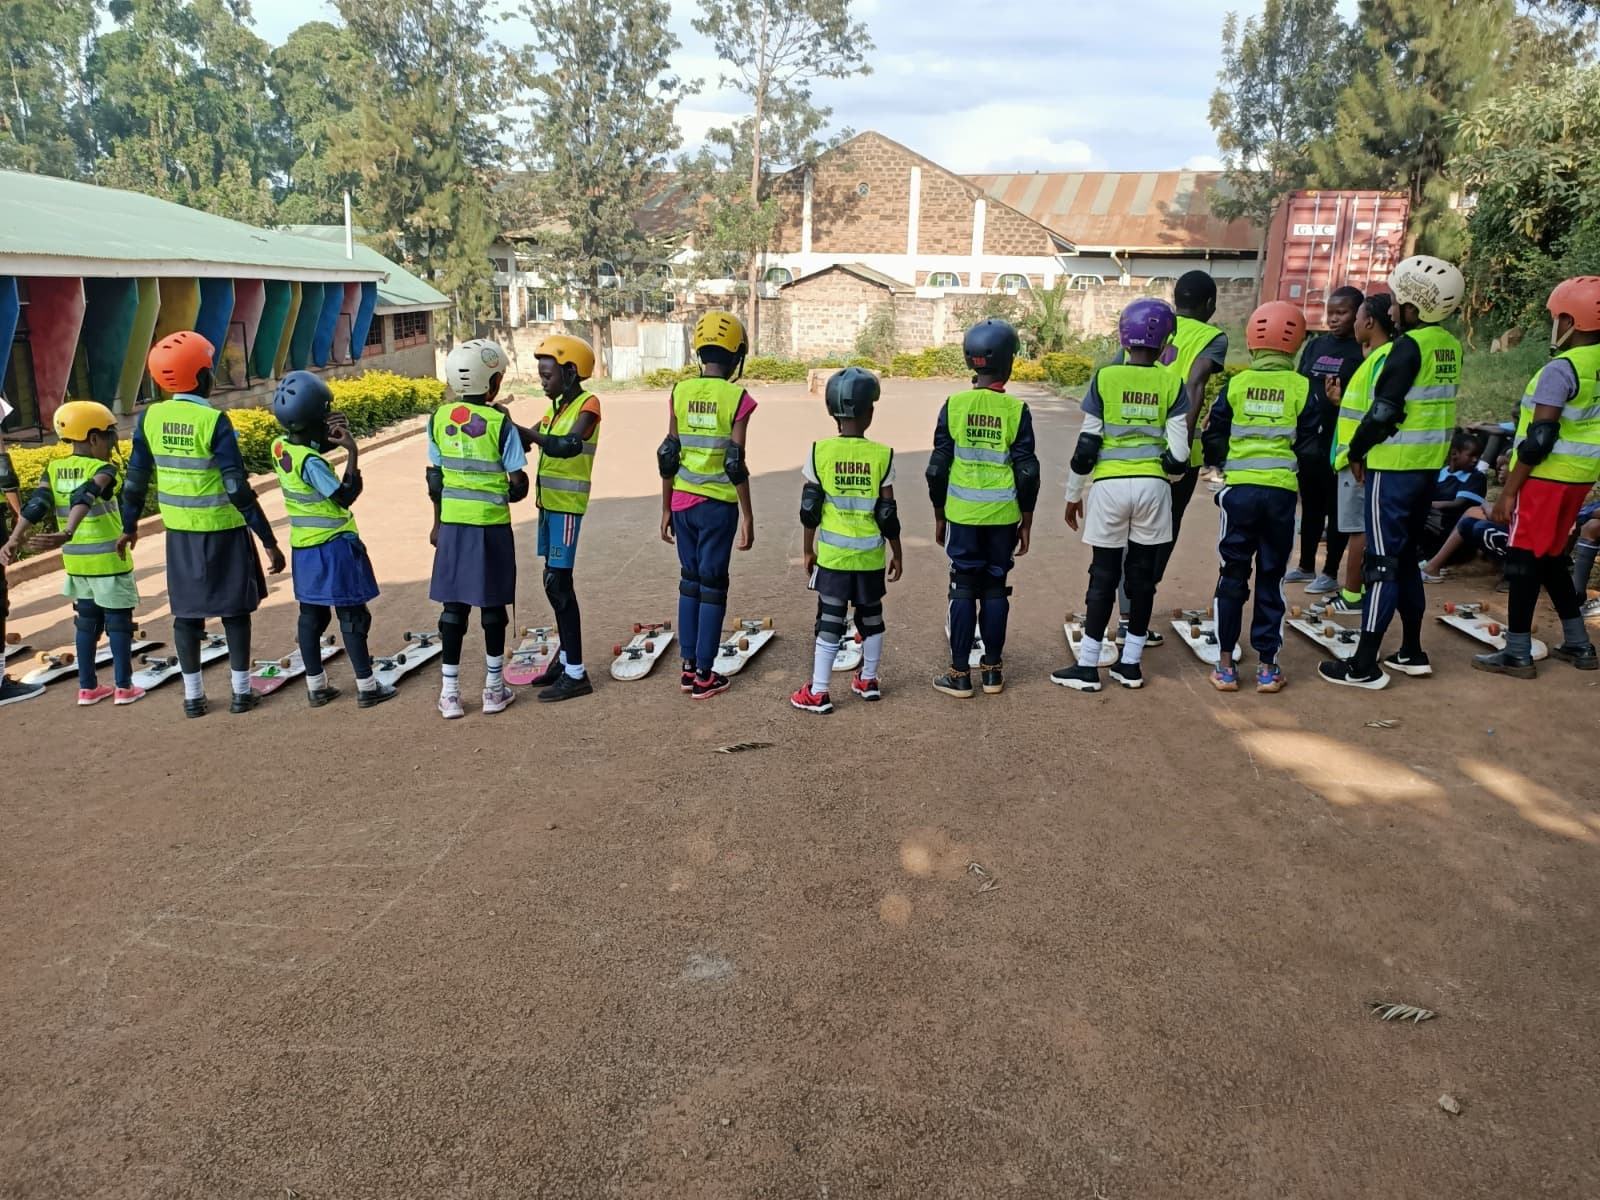 Project Elimu partners with Skateistan Foundation